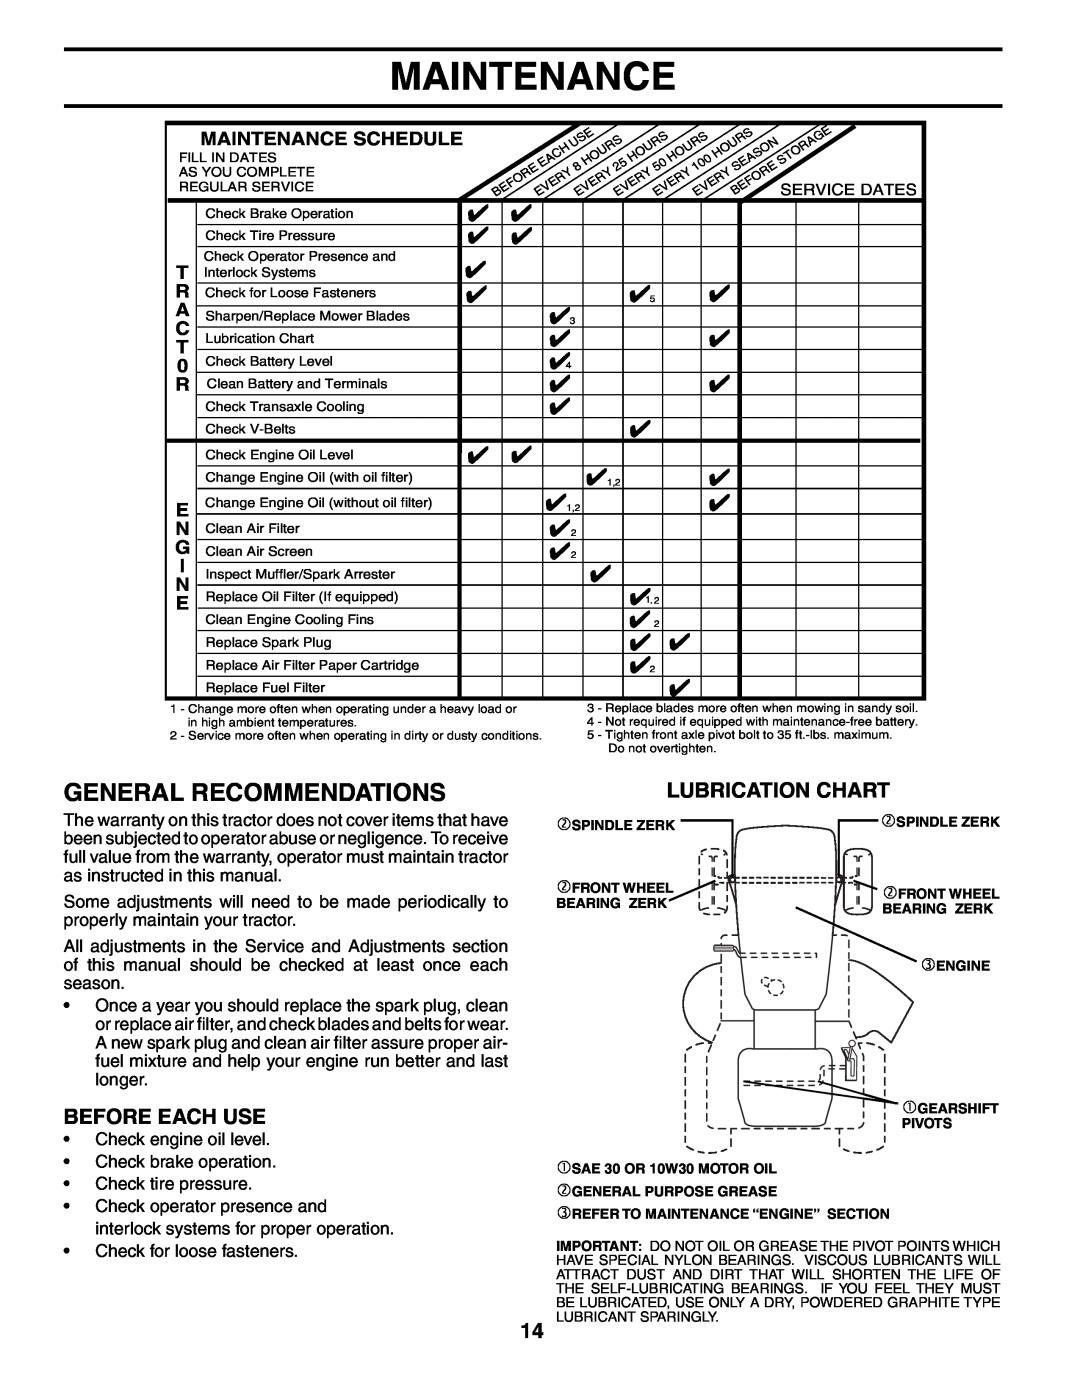 Poulan PO1842STA manual Maintenance, General Recommendations, Before Each Use, Lubrication Chart 